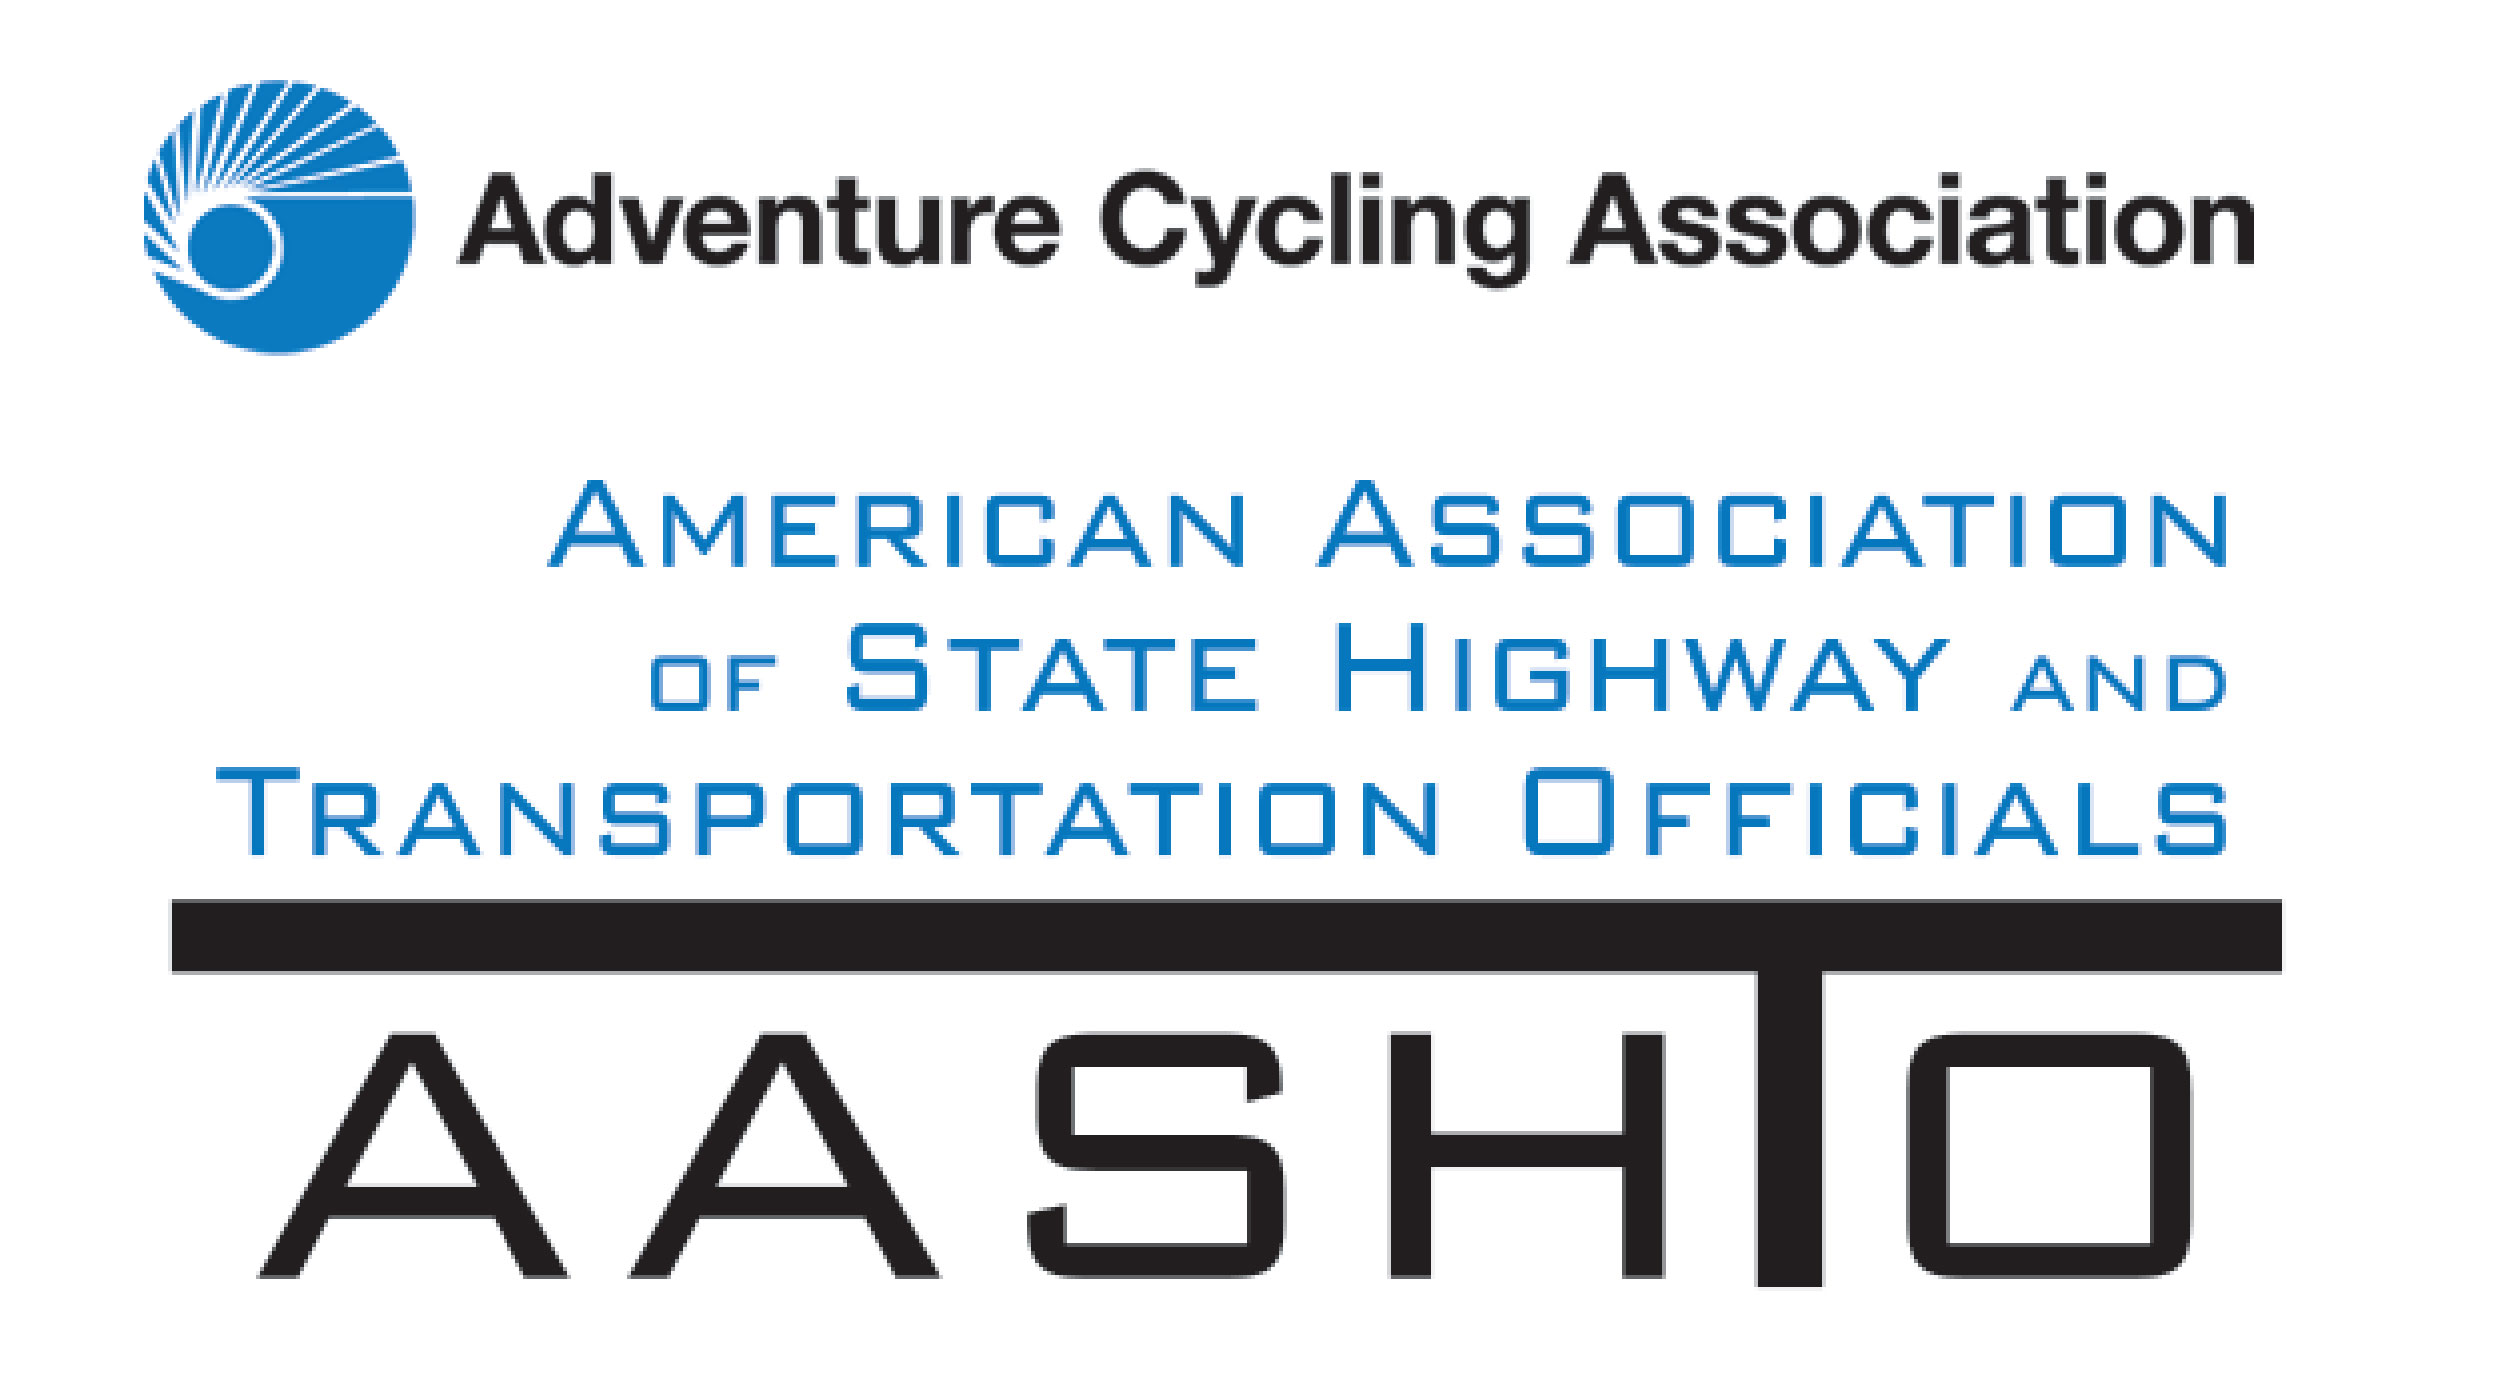 Adventure Cycling and American Association of Highway and State Transportation Officials logos